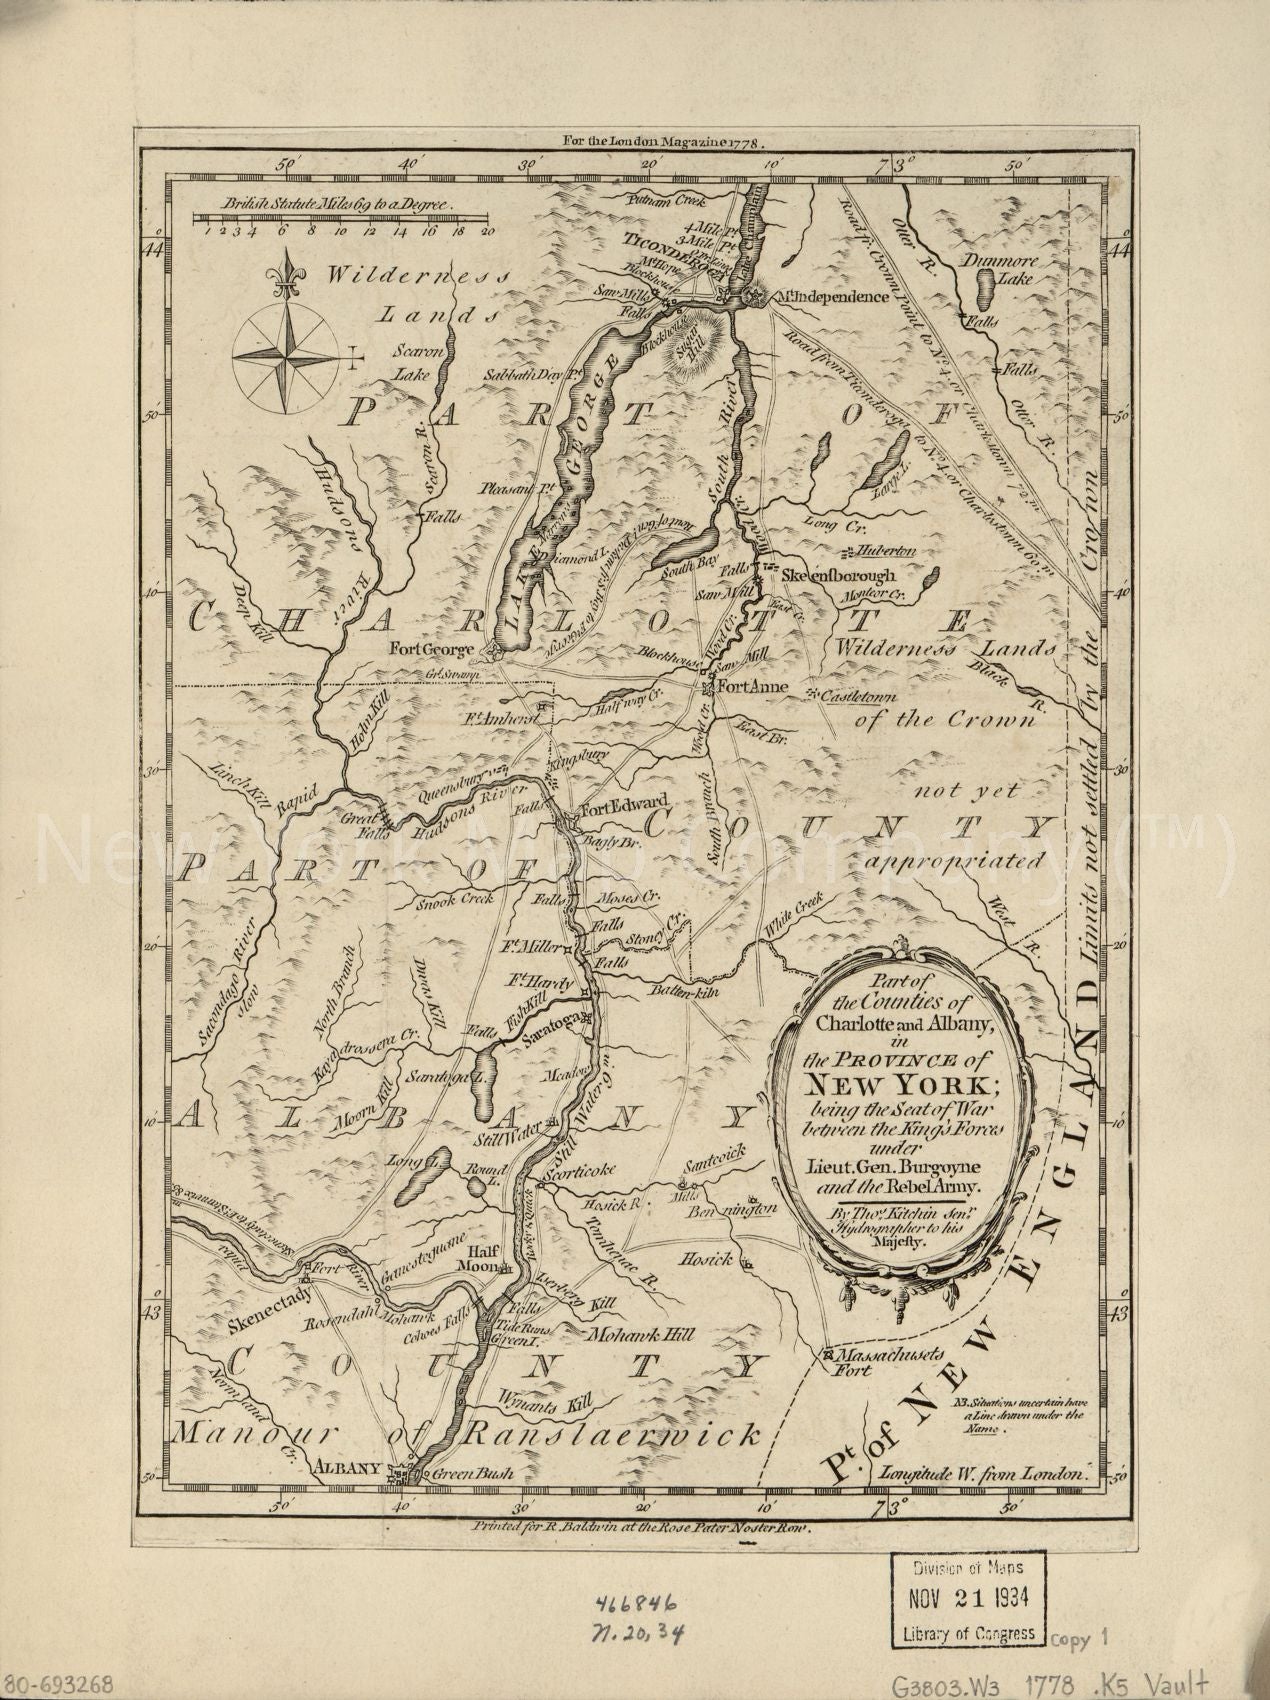 1778 map Part of the counties of Charlotte and Albany, in the Province of New York: being the seat of war between the King's forces under Lieut. Gen. Burgoyne and the rebel army For the London magazine 1778. Map Subjects: Albany County | Albany County NY